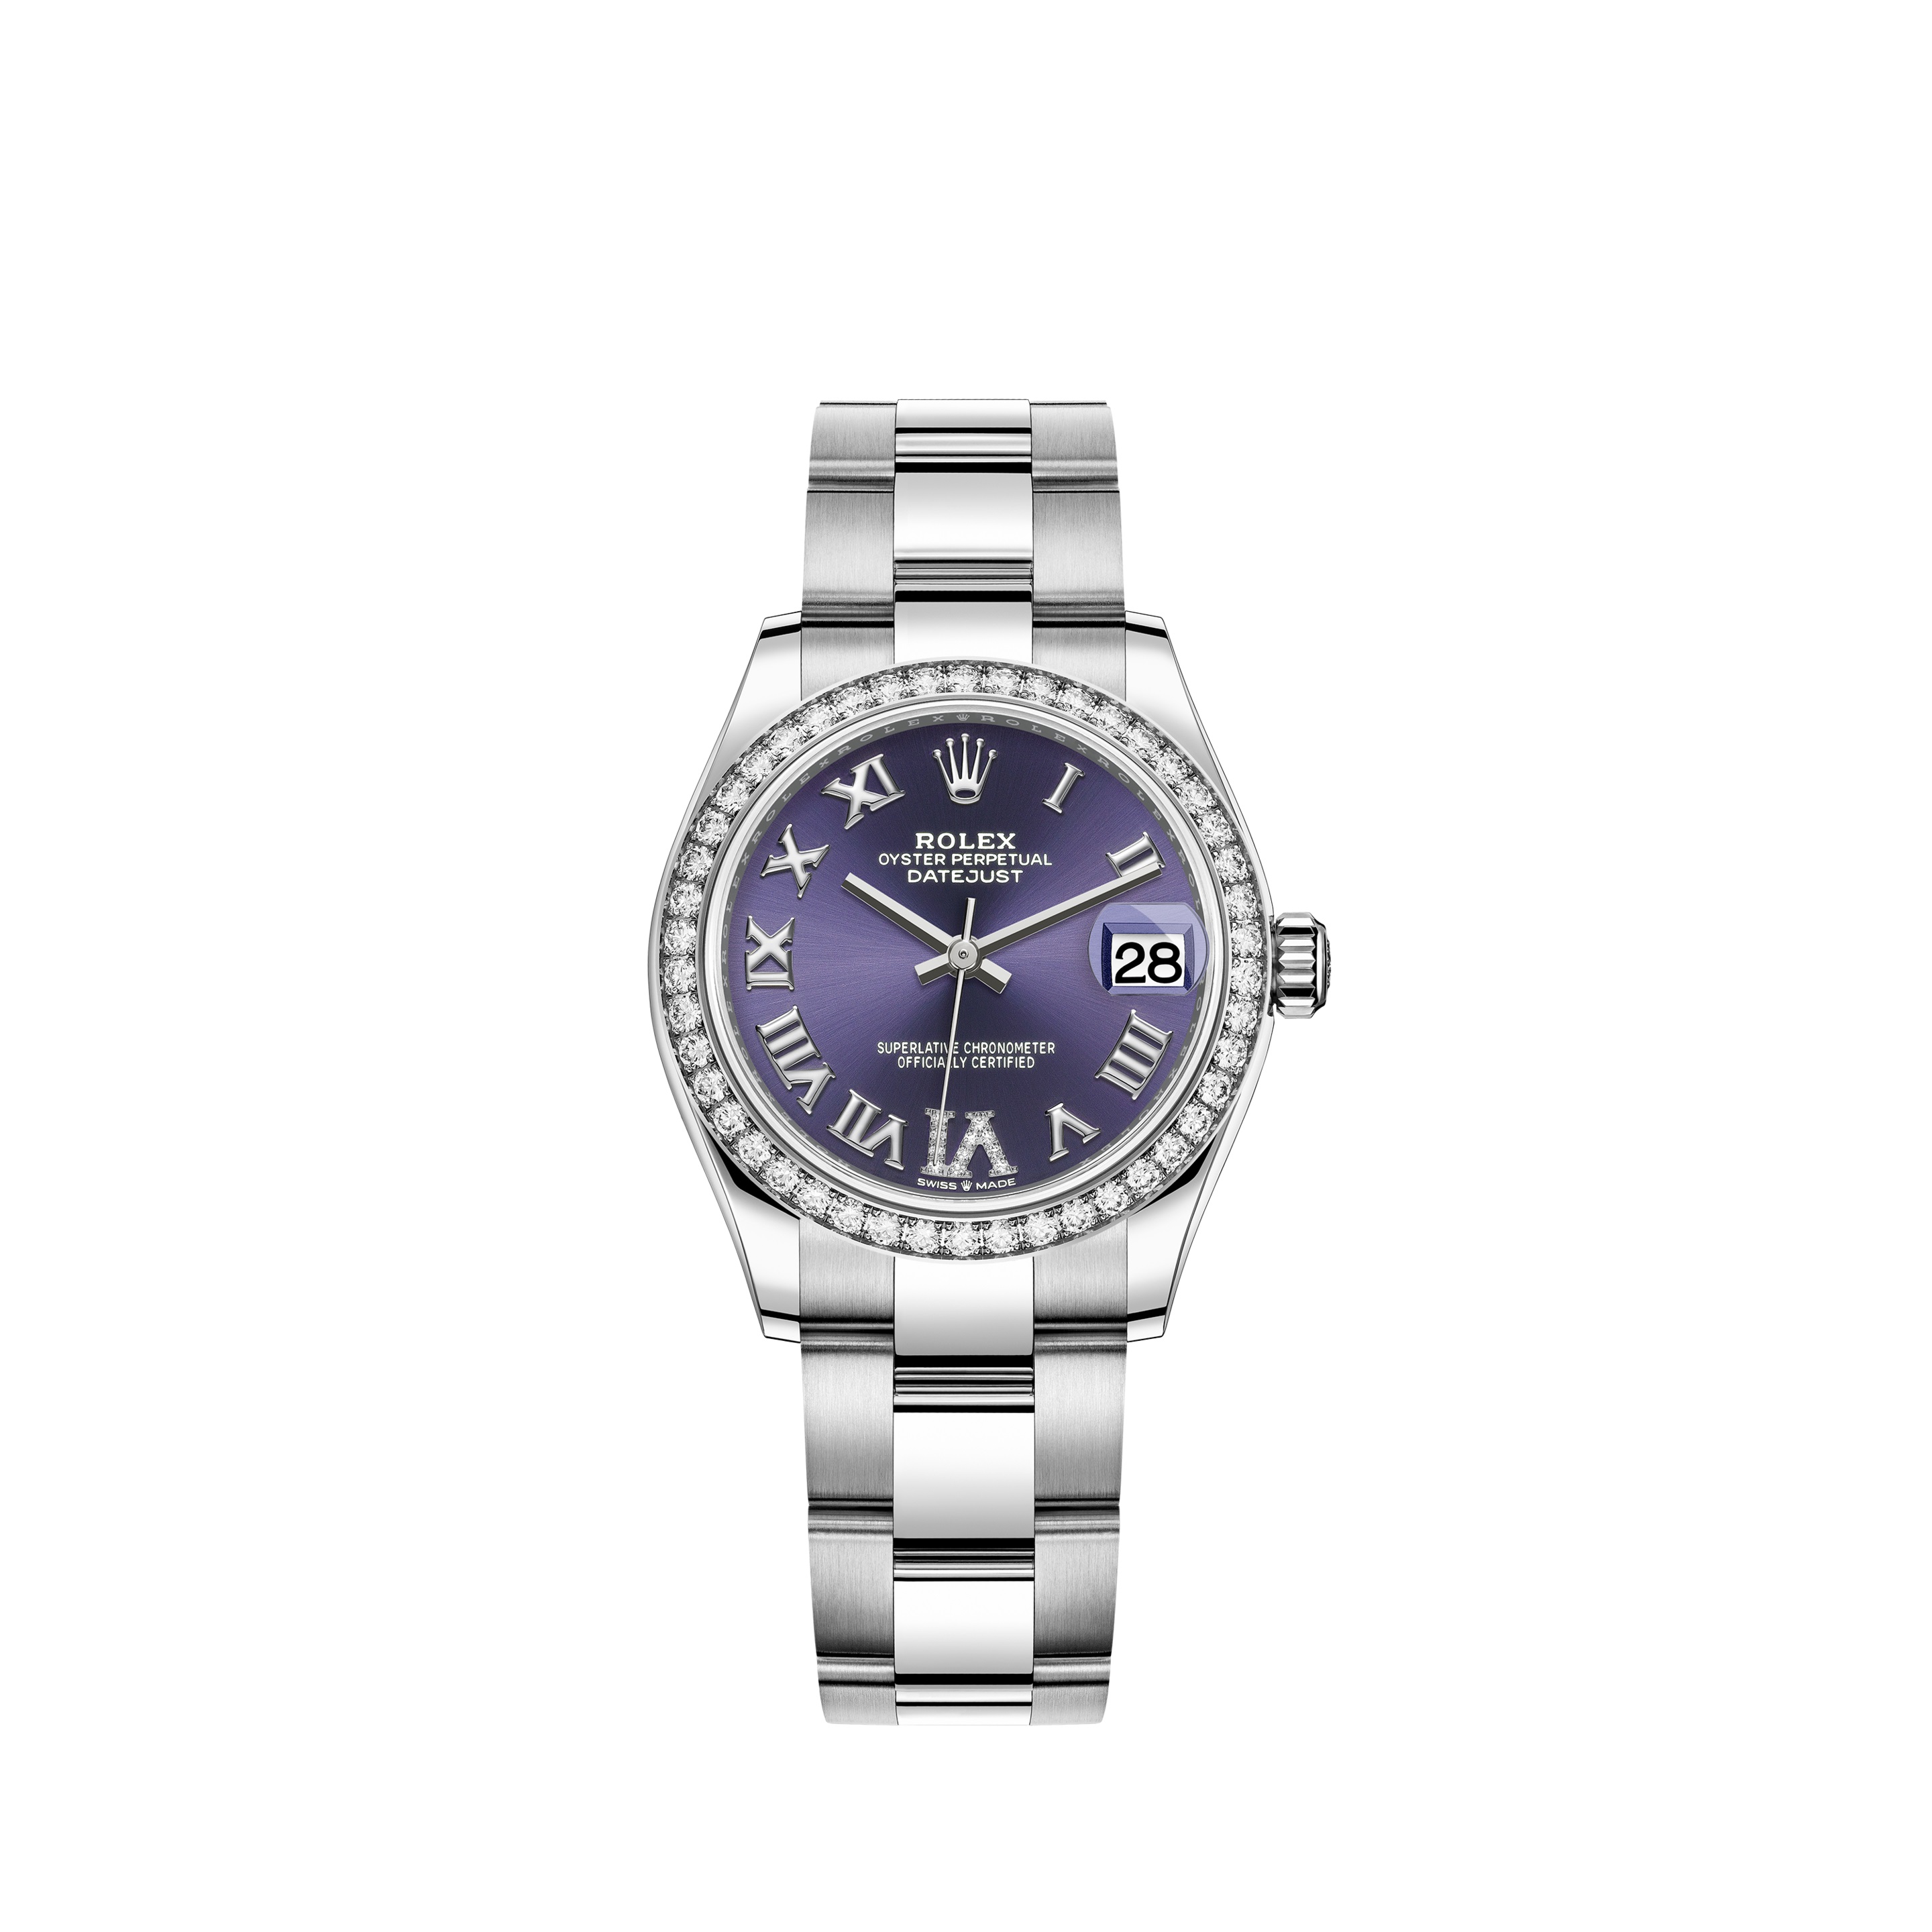 Datejust 31 278384RBR White Gold & Stainless Steel Watch (Aubergine Set with Diamonds)